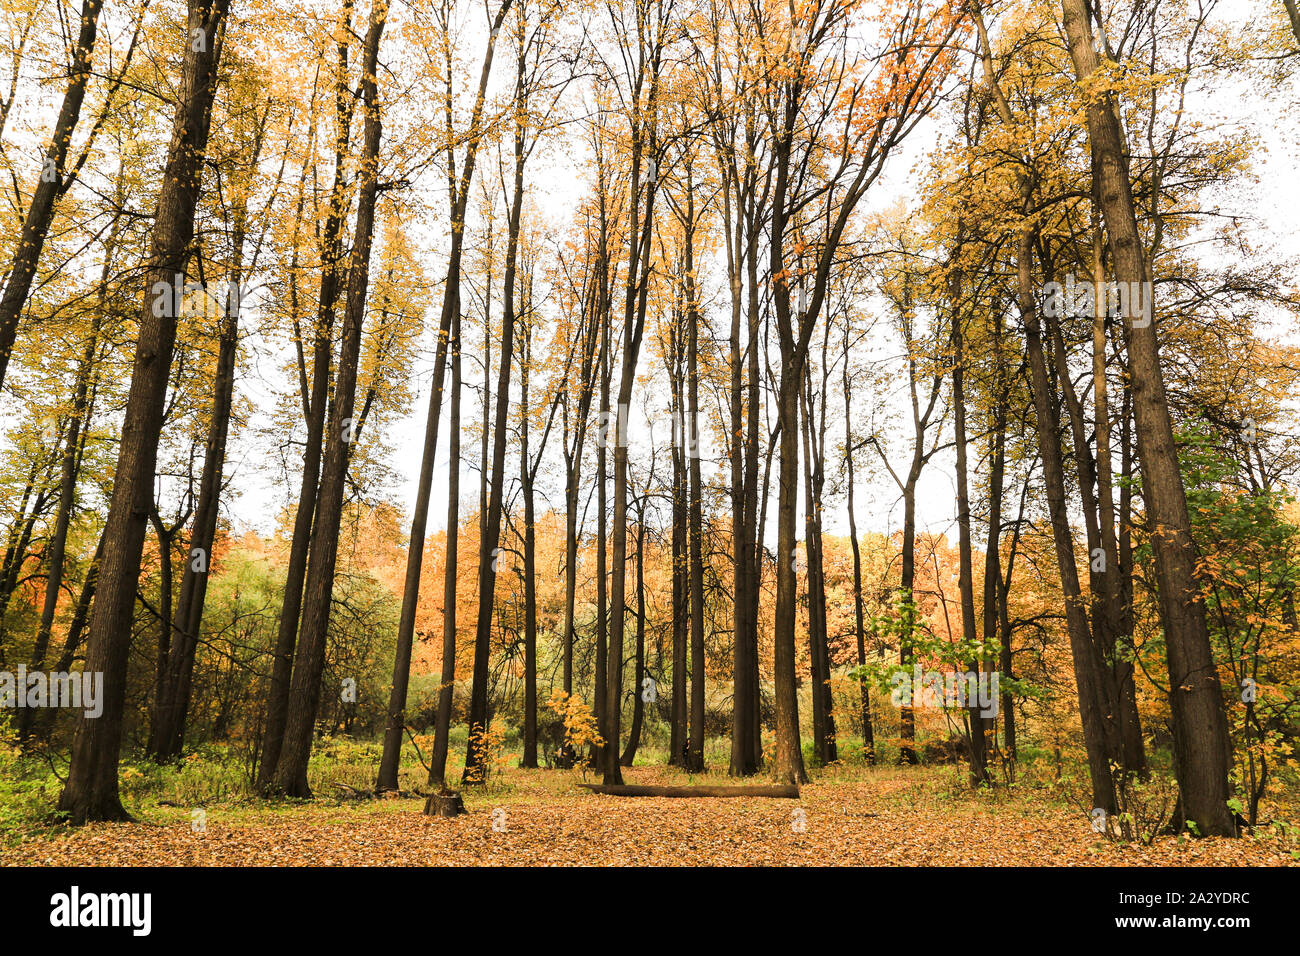 Autumn in Moscow, Russia. Coloured trees in the wood, trees are red, yellow, oranges and leaves cover all the ground. Stock Photo